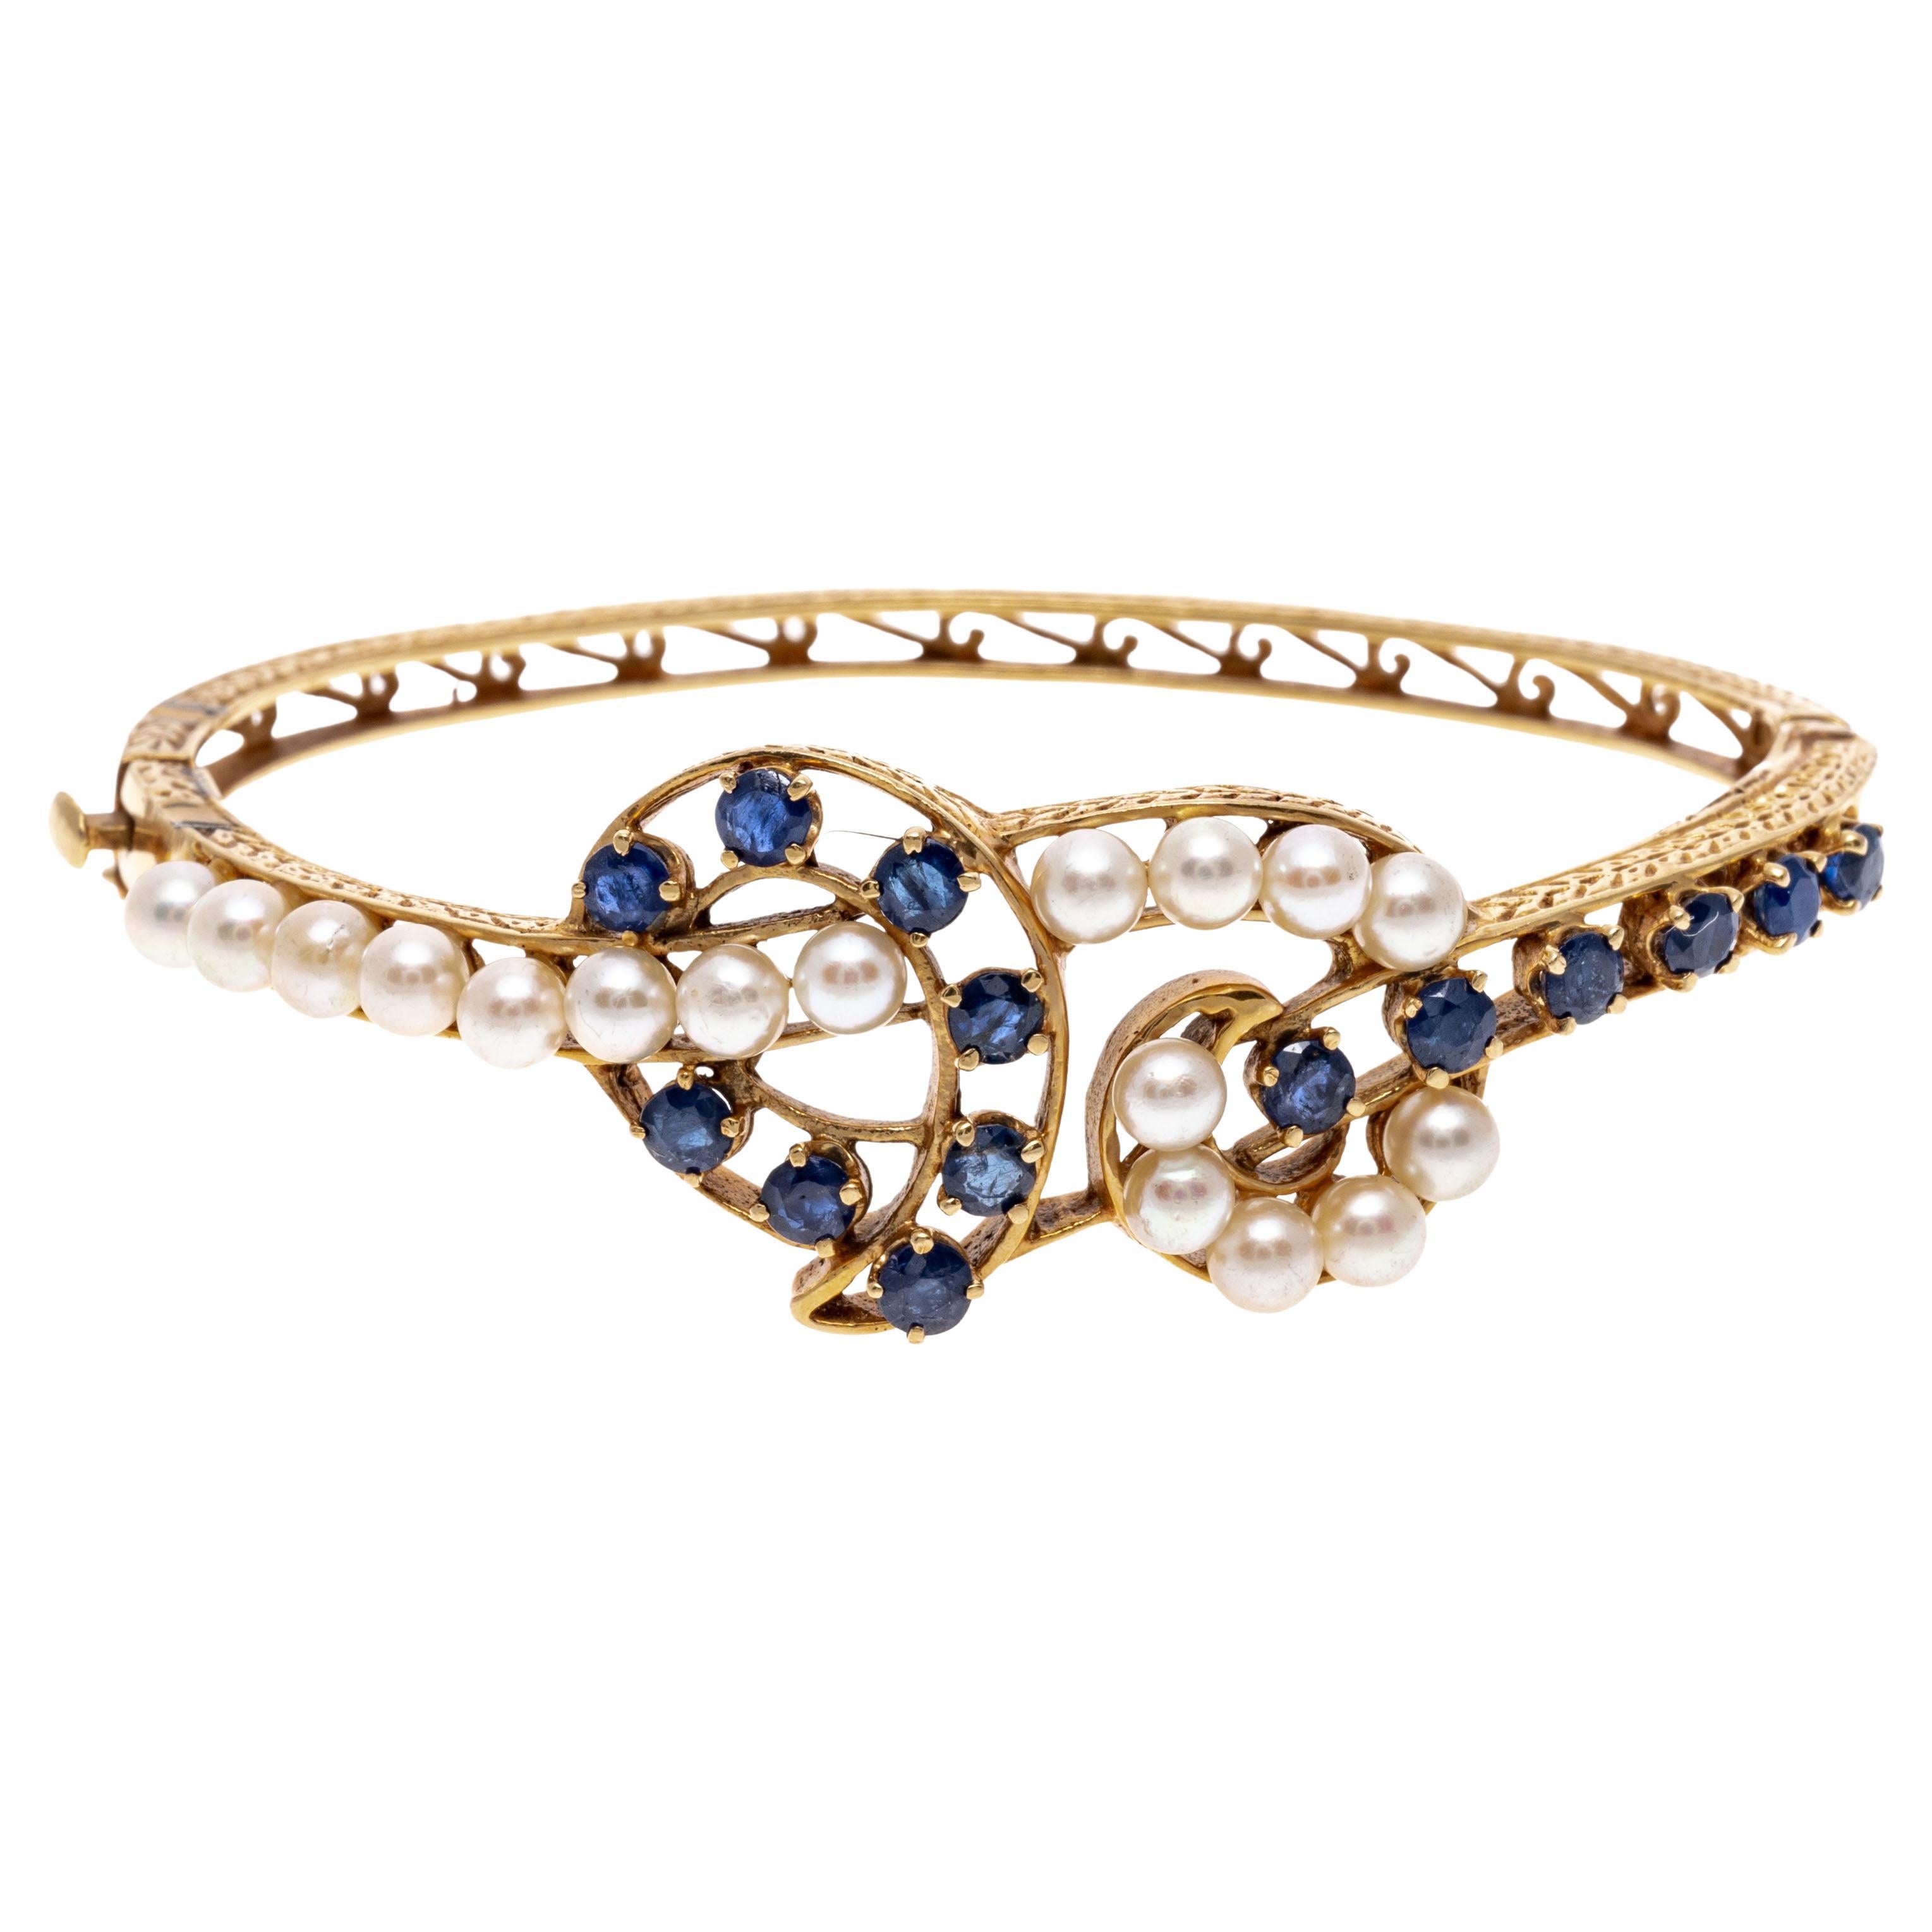 14K Gold, Sapphire and Cultured Pearl Knot Motif Bangle Bracelet